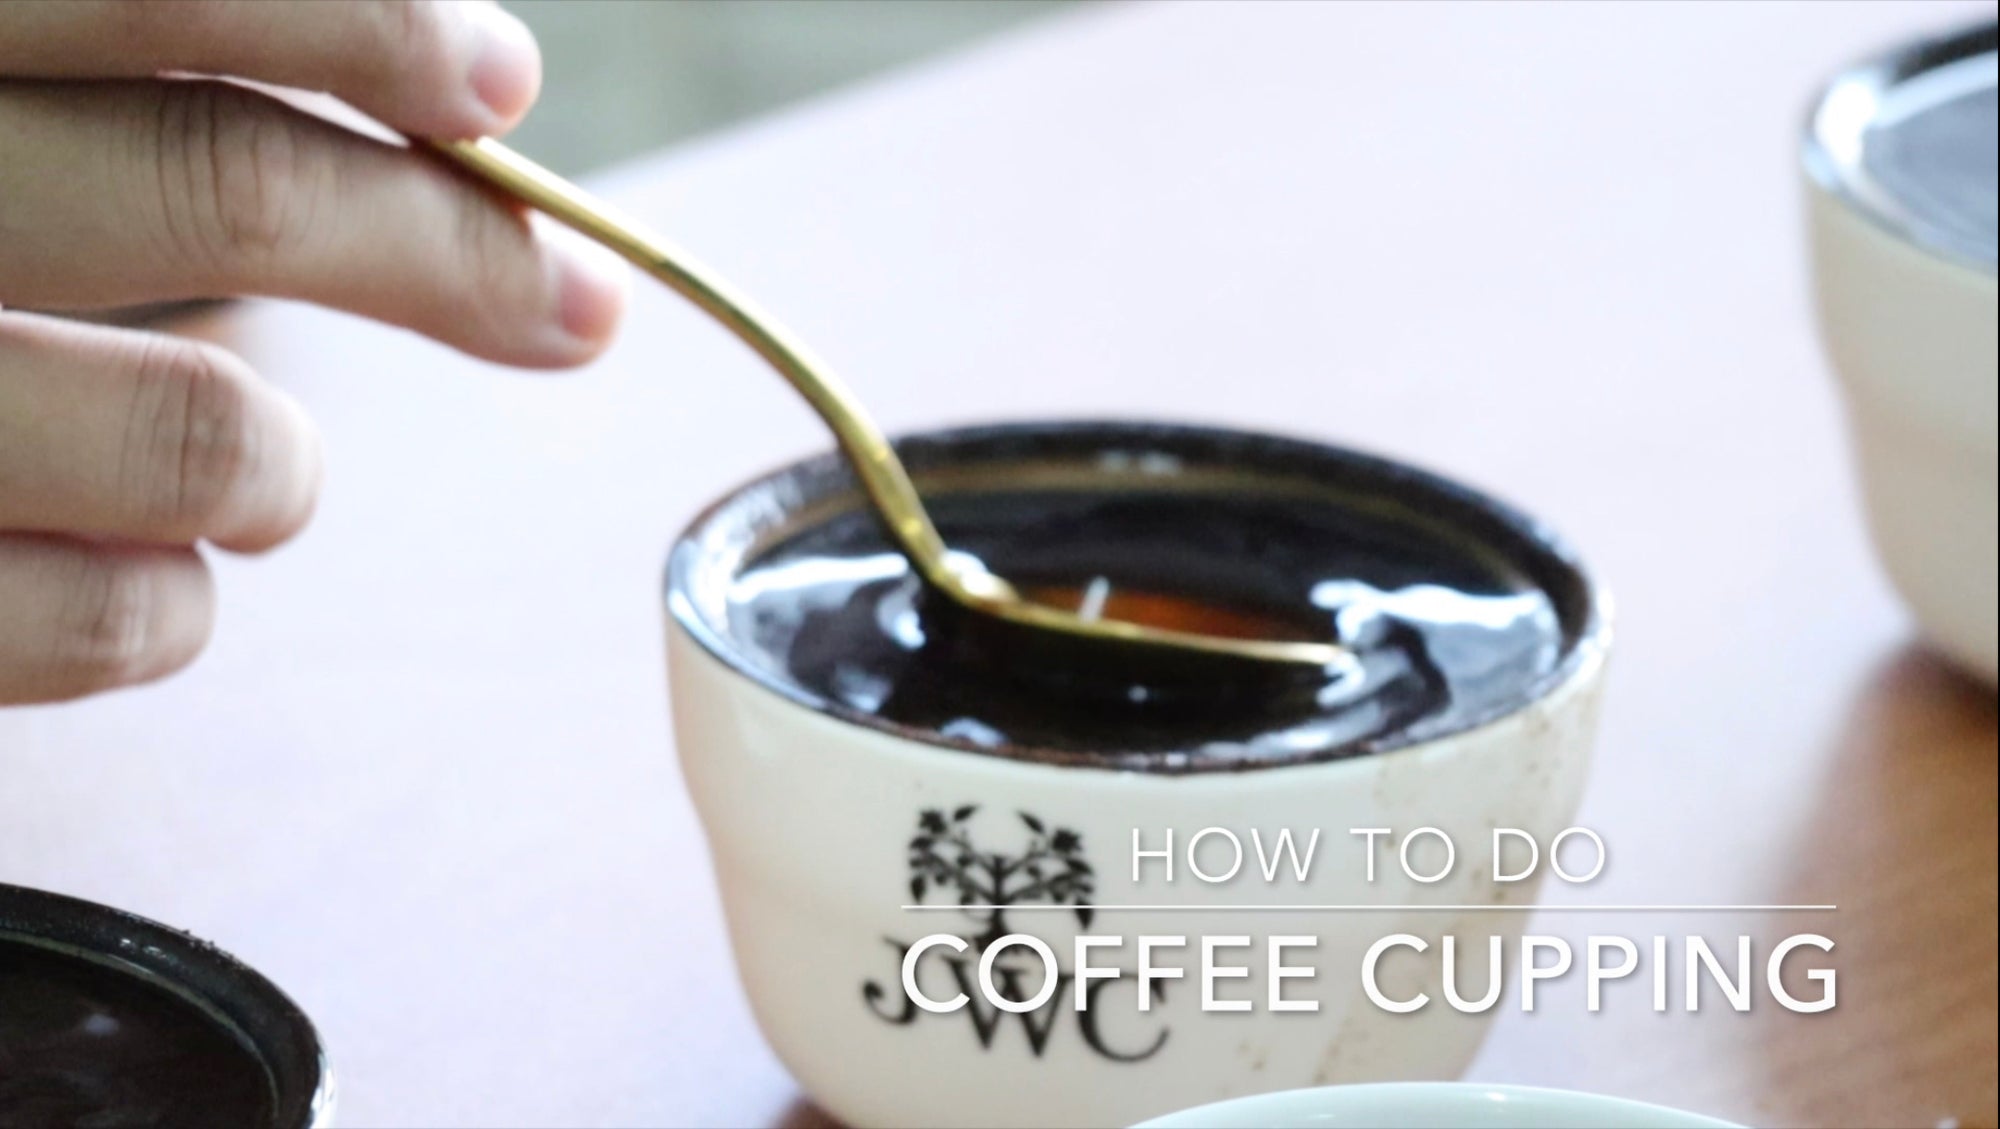 Learn Coffee Cupping with Michael